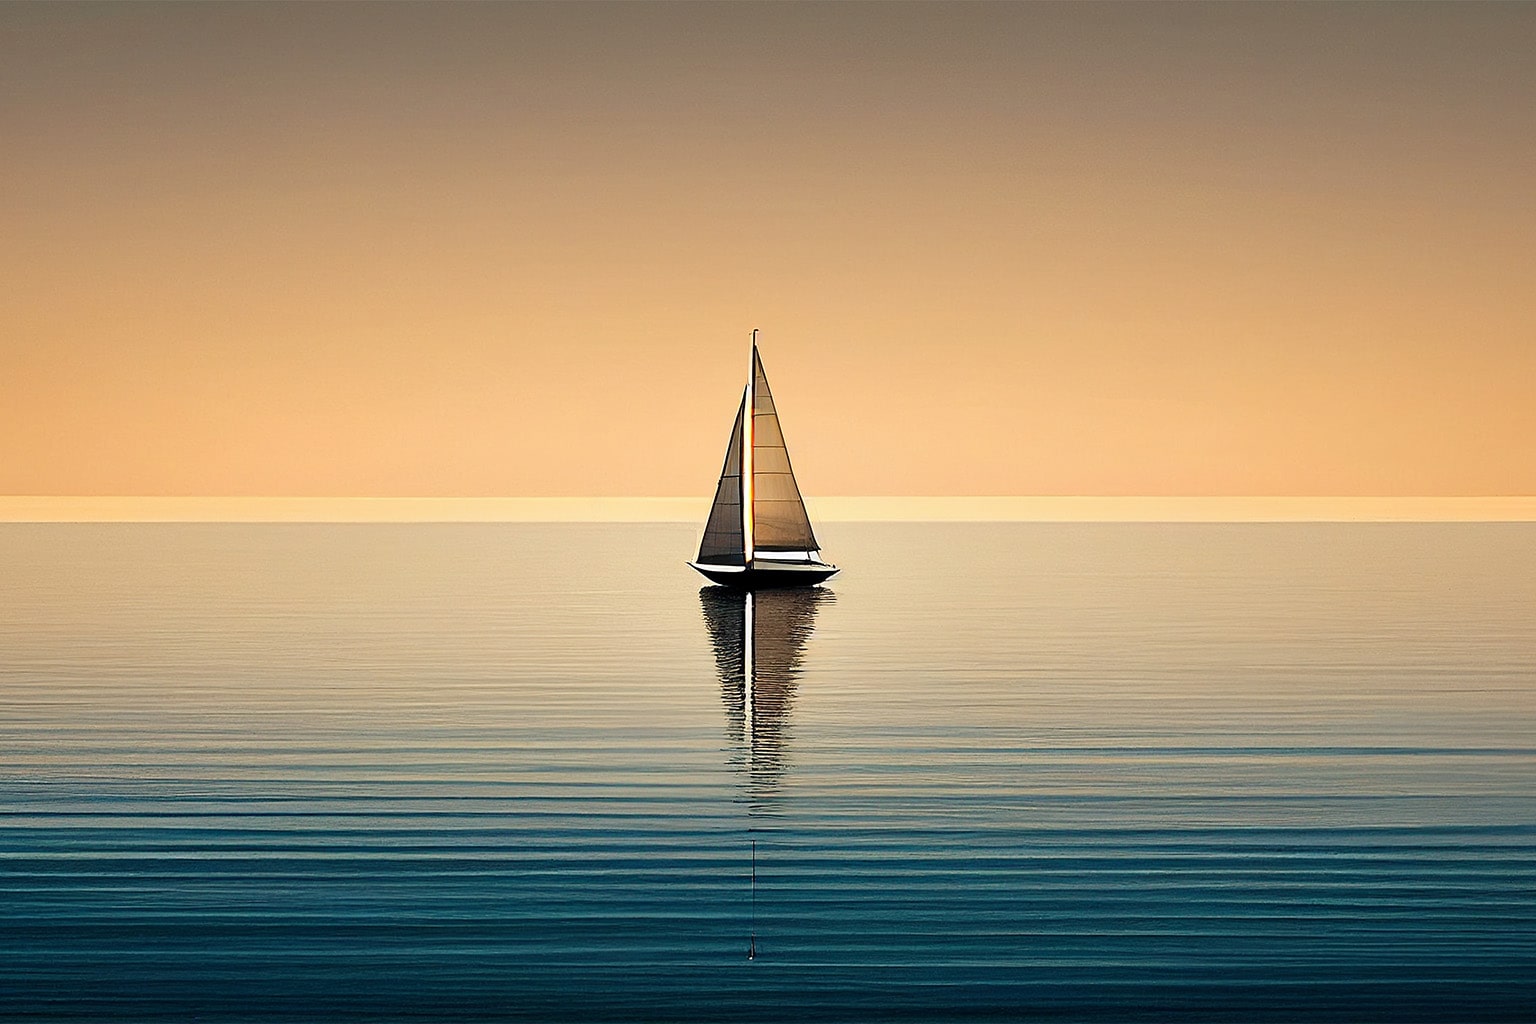 Sailboat on an ocean symboling peace of mind with NetSuite Governance, Risk, and Compliance